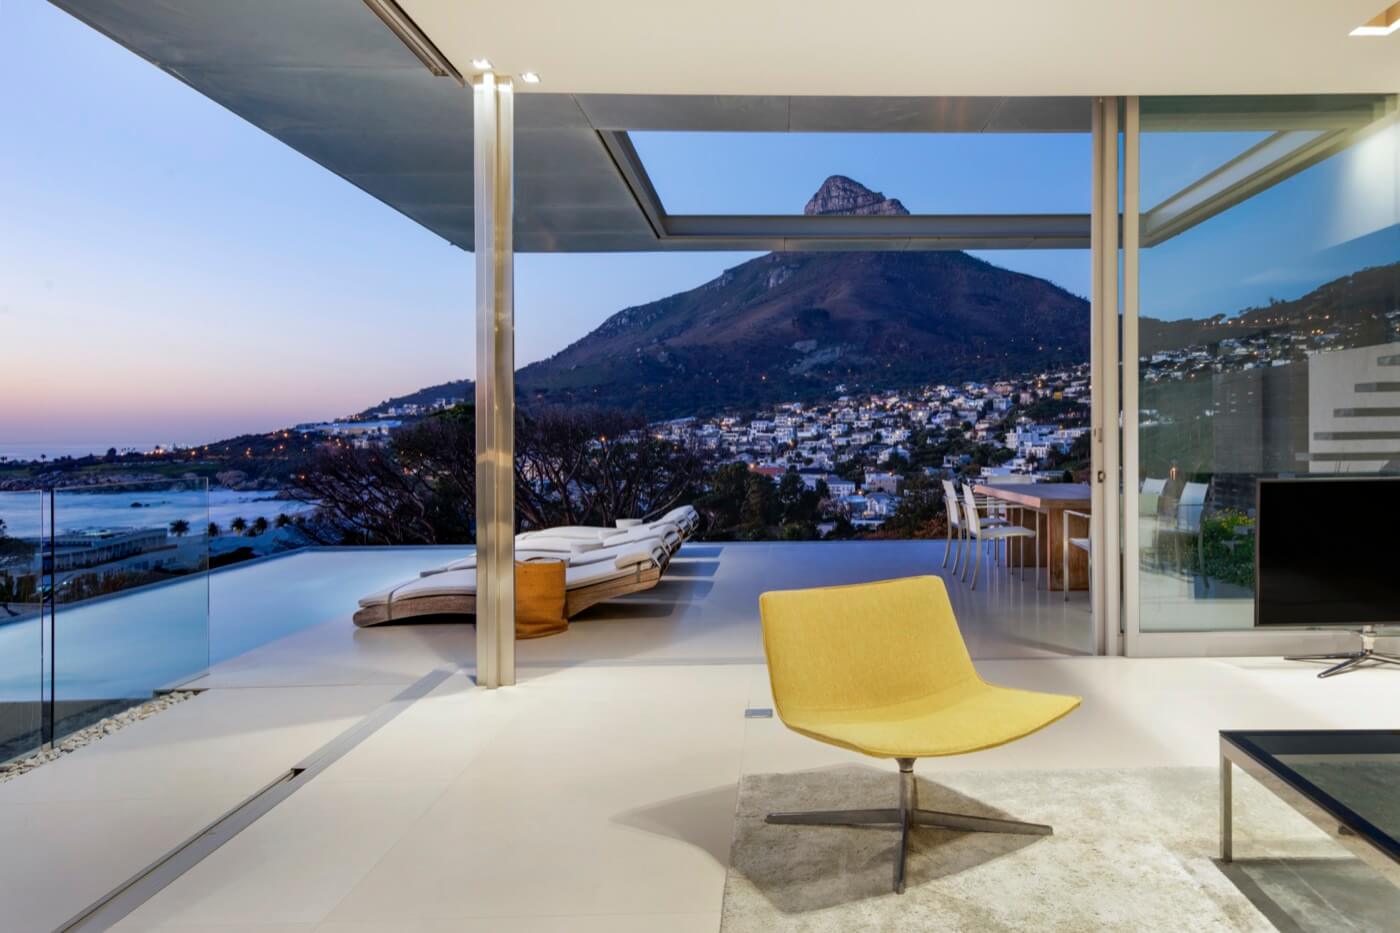 Photo 14 of The Crescent accommodation in Camps Bay, Cape Town with 6 bedrooms and 6.5 bathrooms